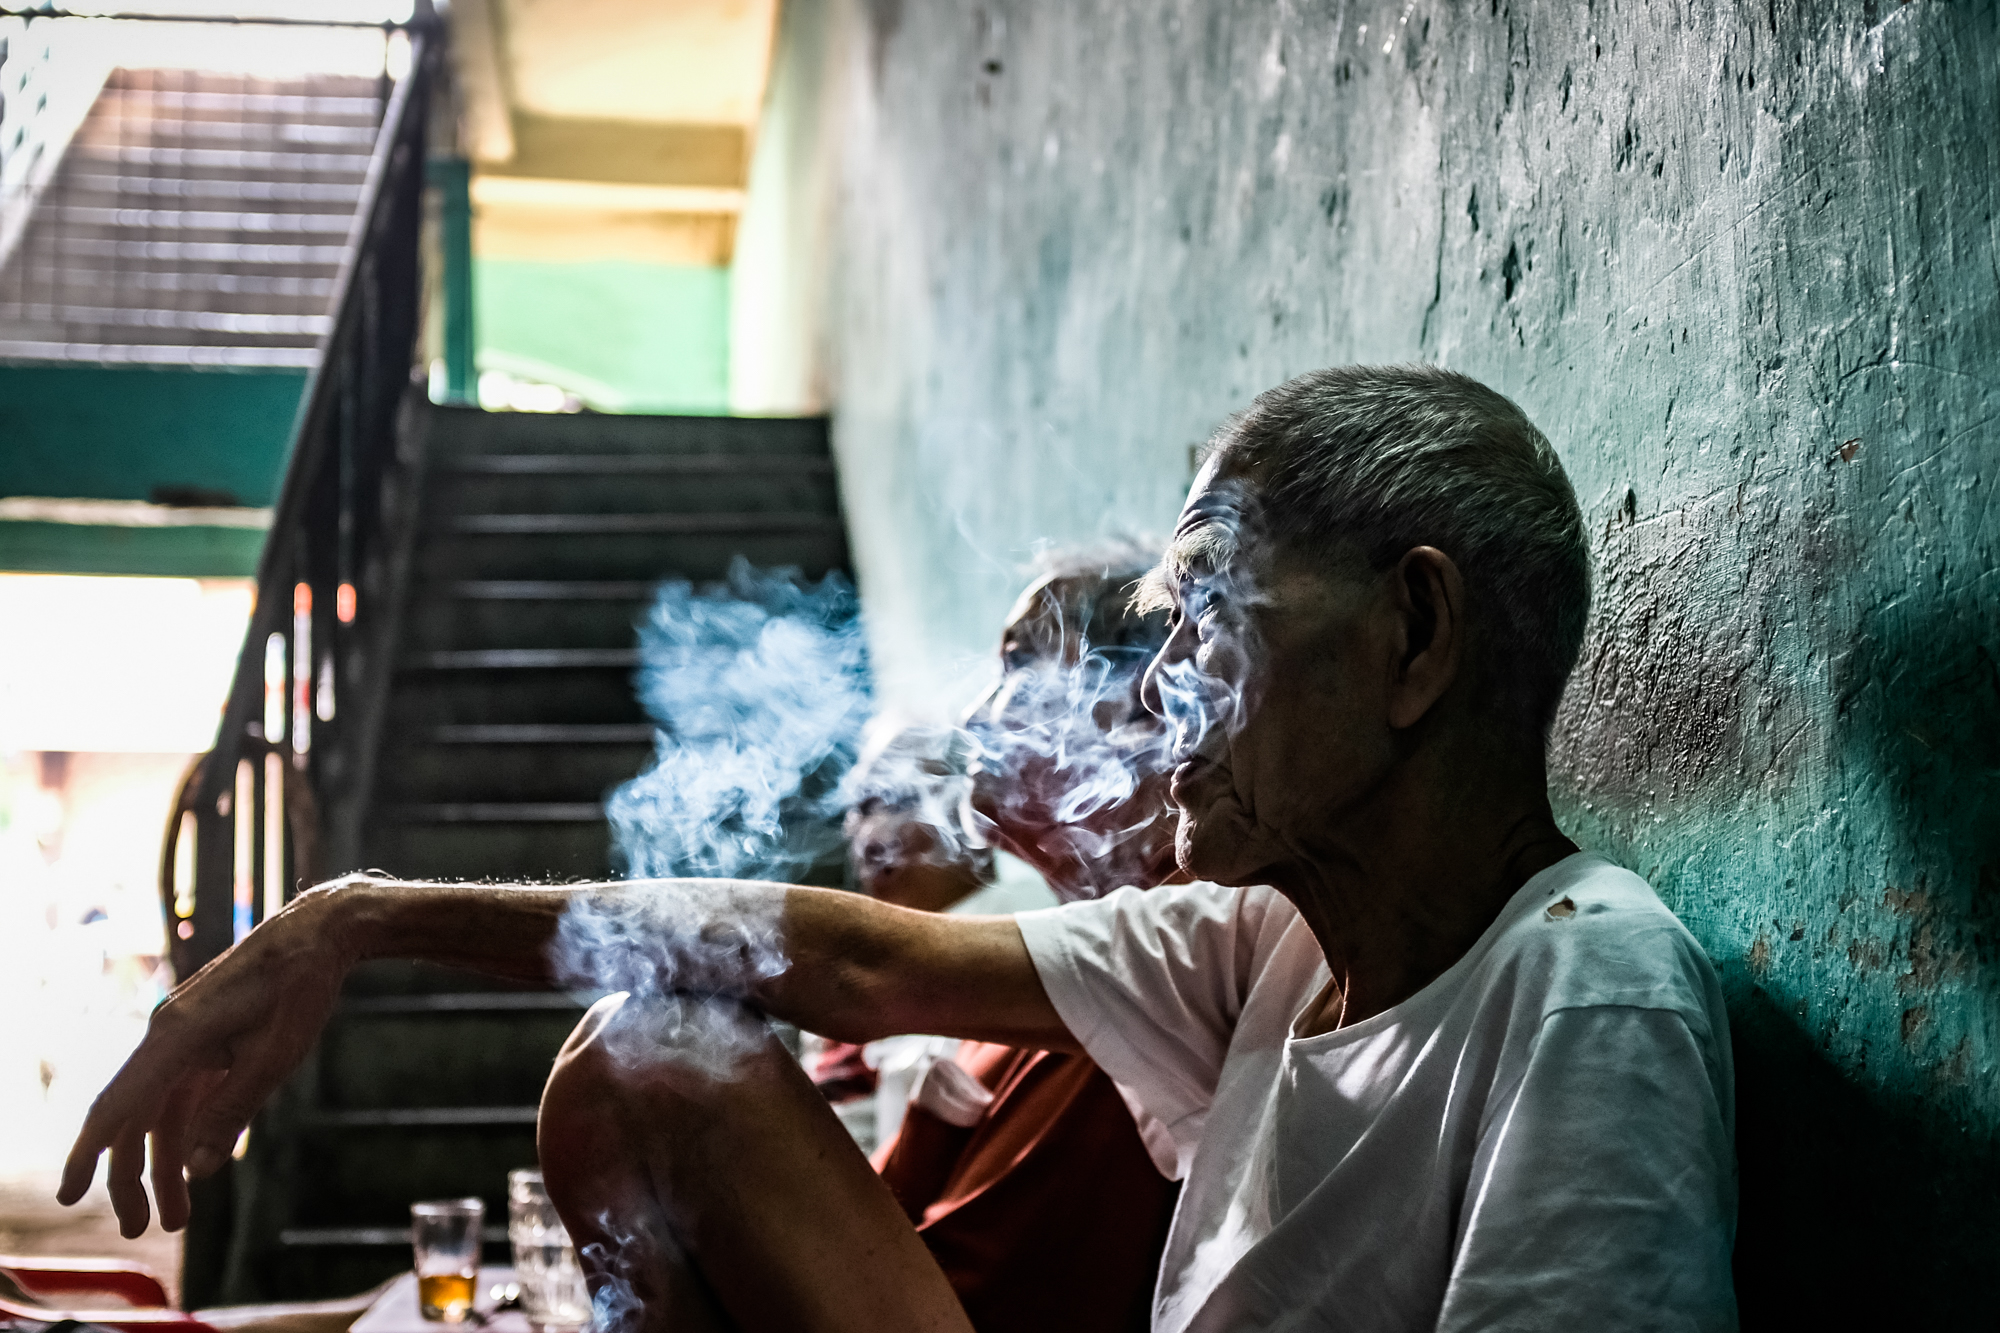 A group of men smoke cigarettes in an historic alley in Chinatown, Ho Chi Minh City, Vietnam